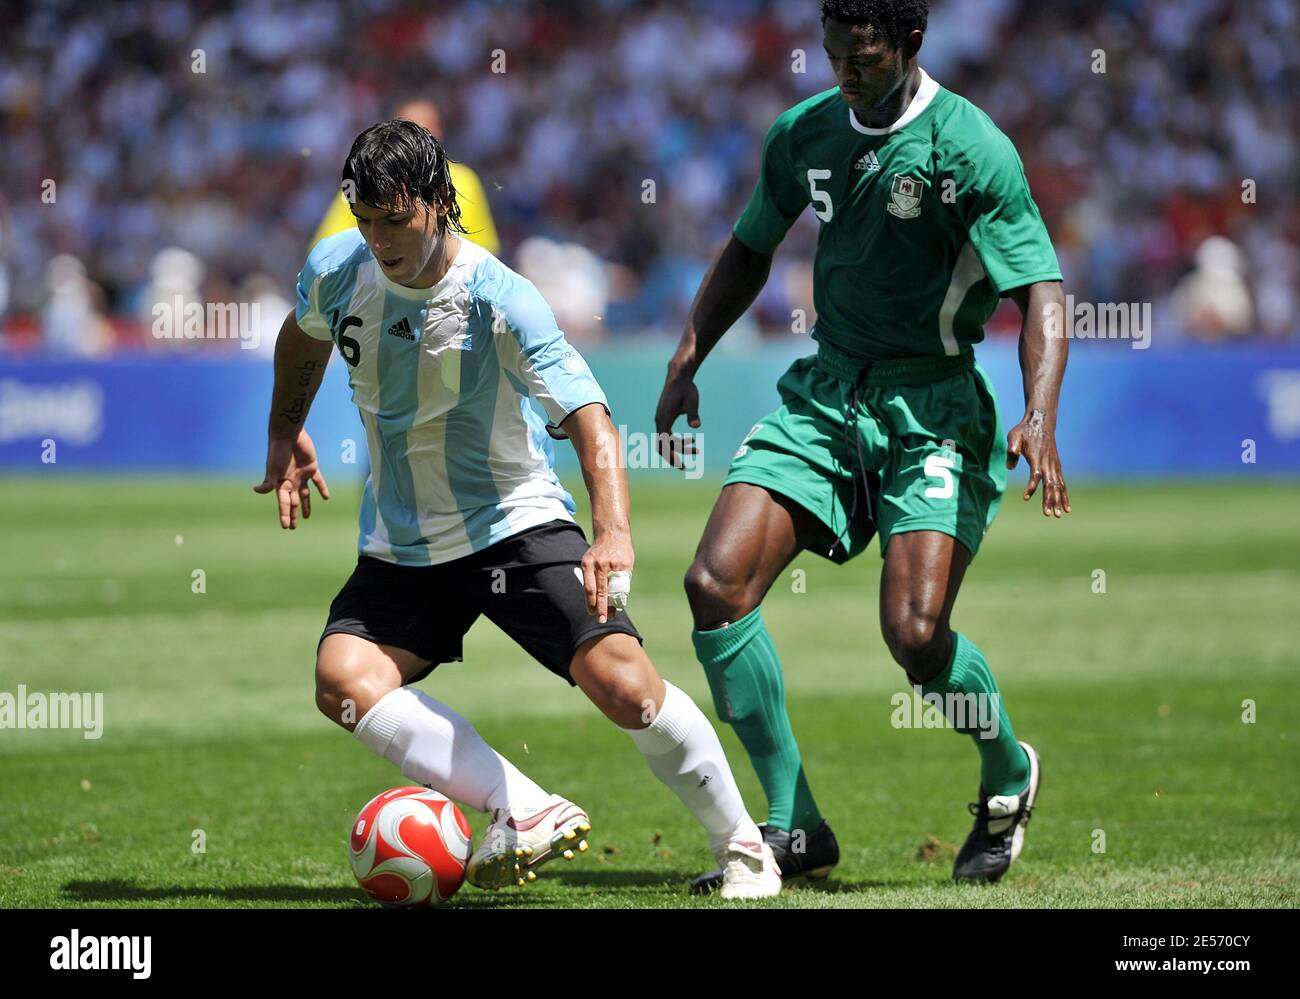 Argentina's Sergio Aguero battle for the ball with Nigeria's Dele Adeleye during the Men's Gold Medal football match between Nigeria and Argentina of Beijing 2008 Olympic Games on Day 15 at the National Stadium in Beijing, China on August 23, 2008. Argentina won 1-0. Photo by Gouhier-Hahn/Cameeon/ABACAPRESS.COM Stock Photo